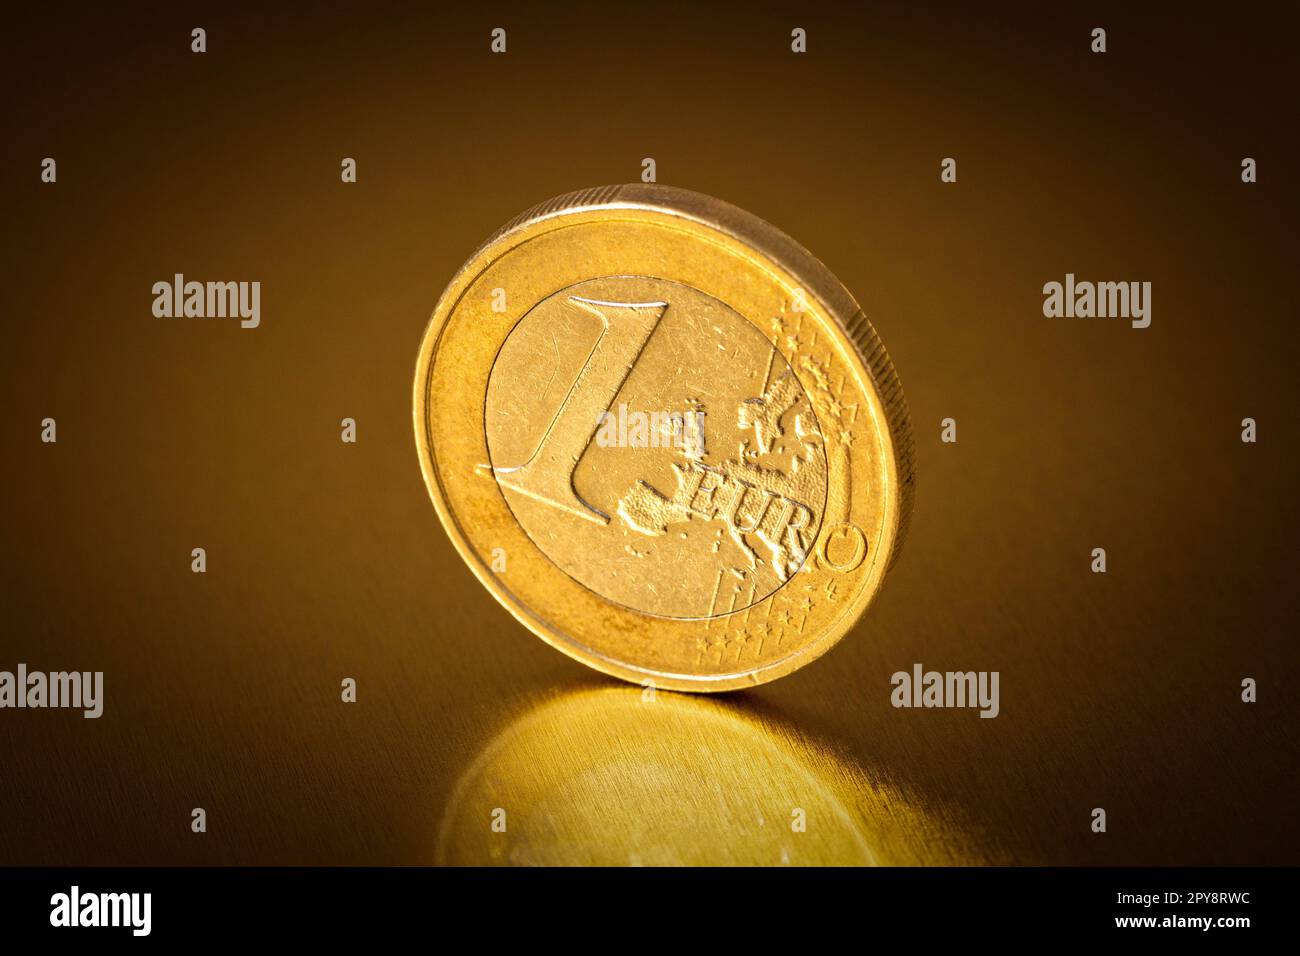 Close-up of one Euro coin on the metal background Stock Photo